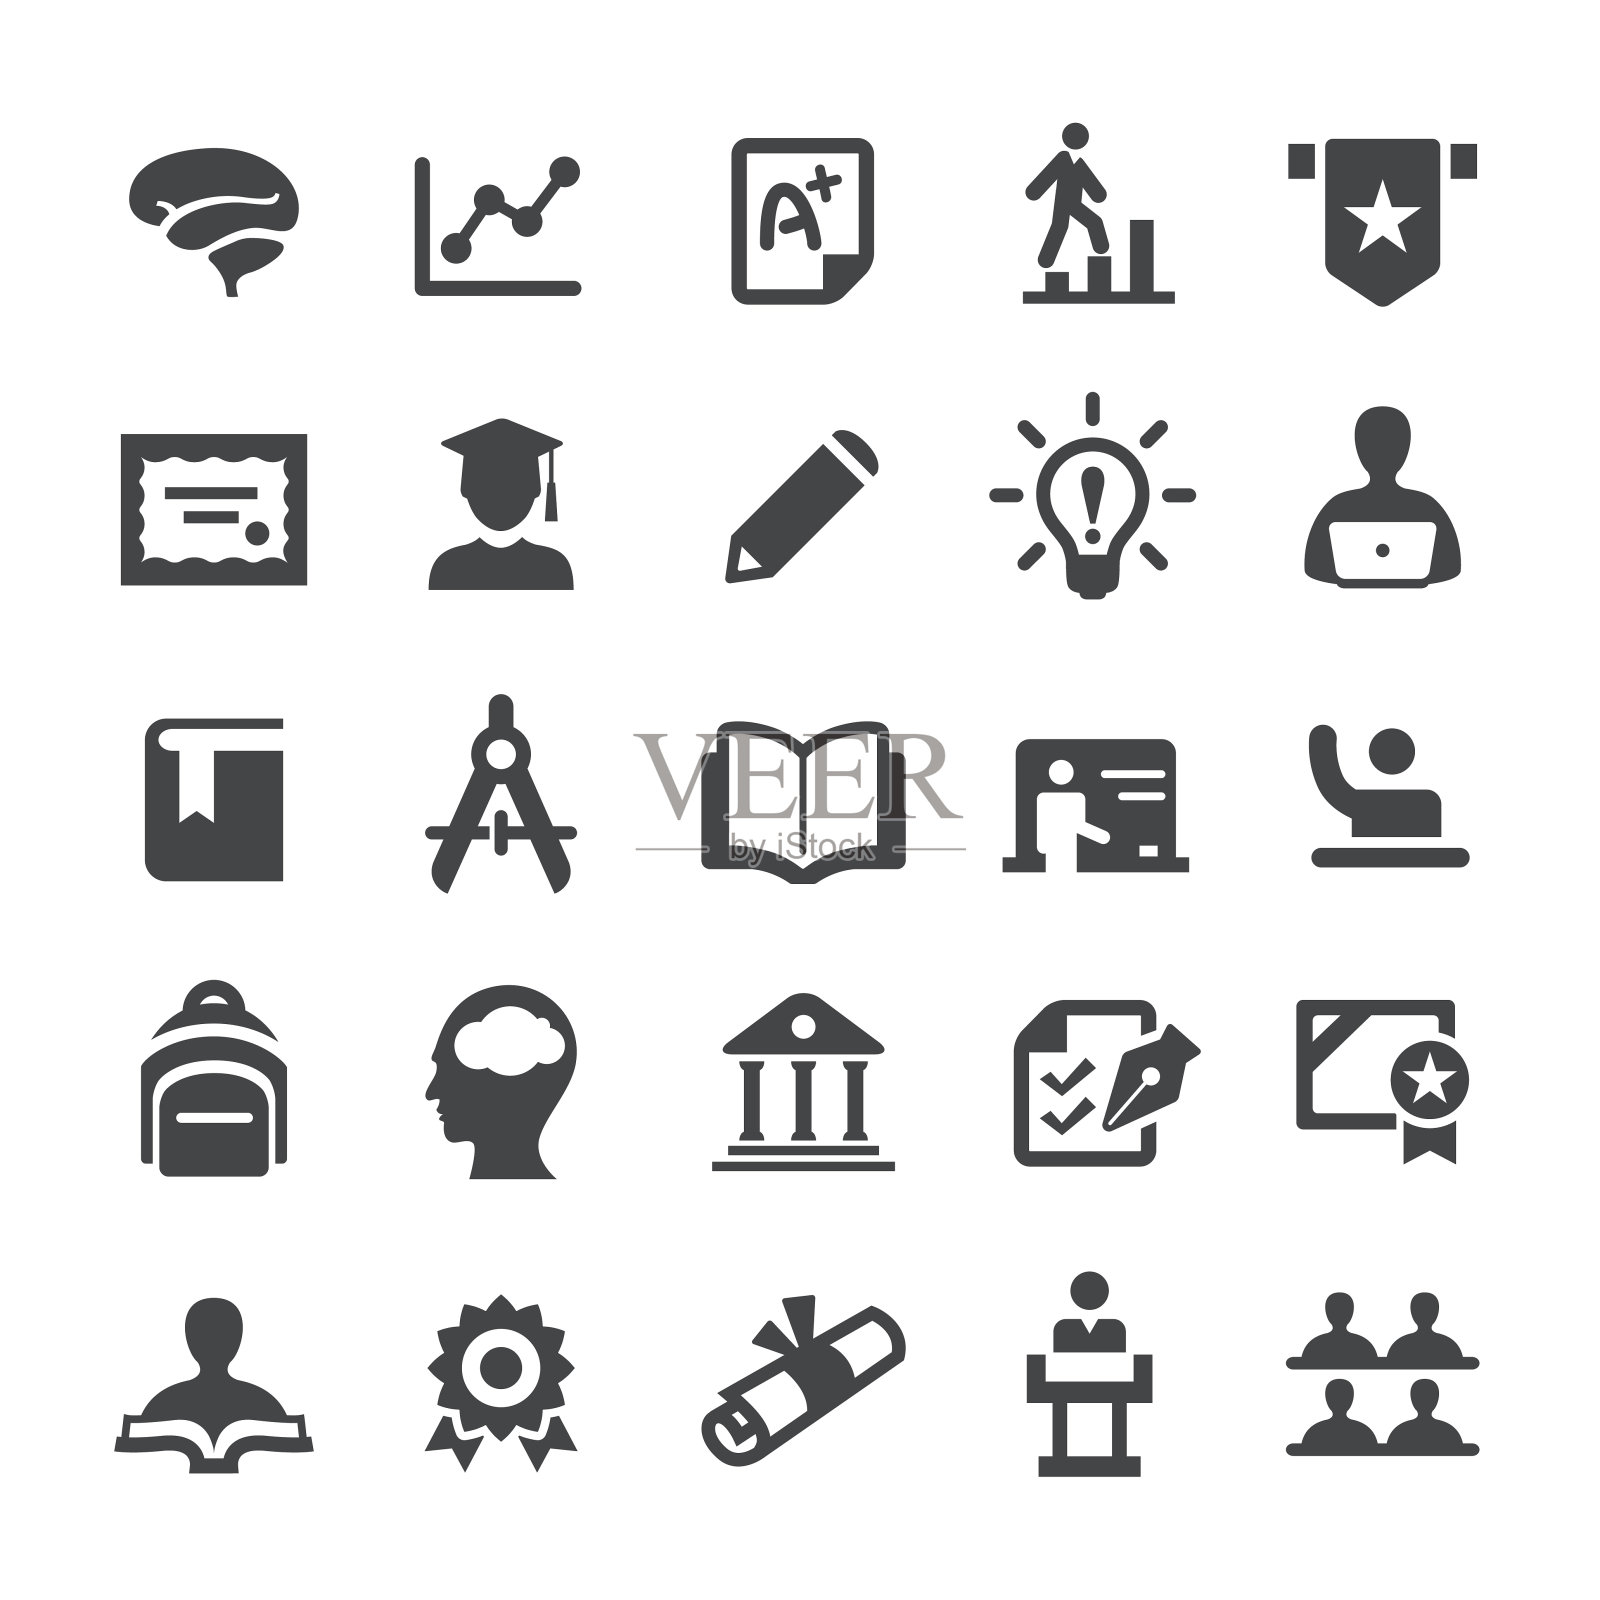 Higher Education Icons - Smart Series设计元素图片